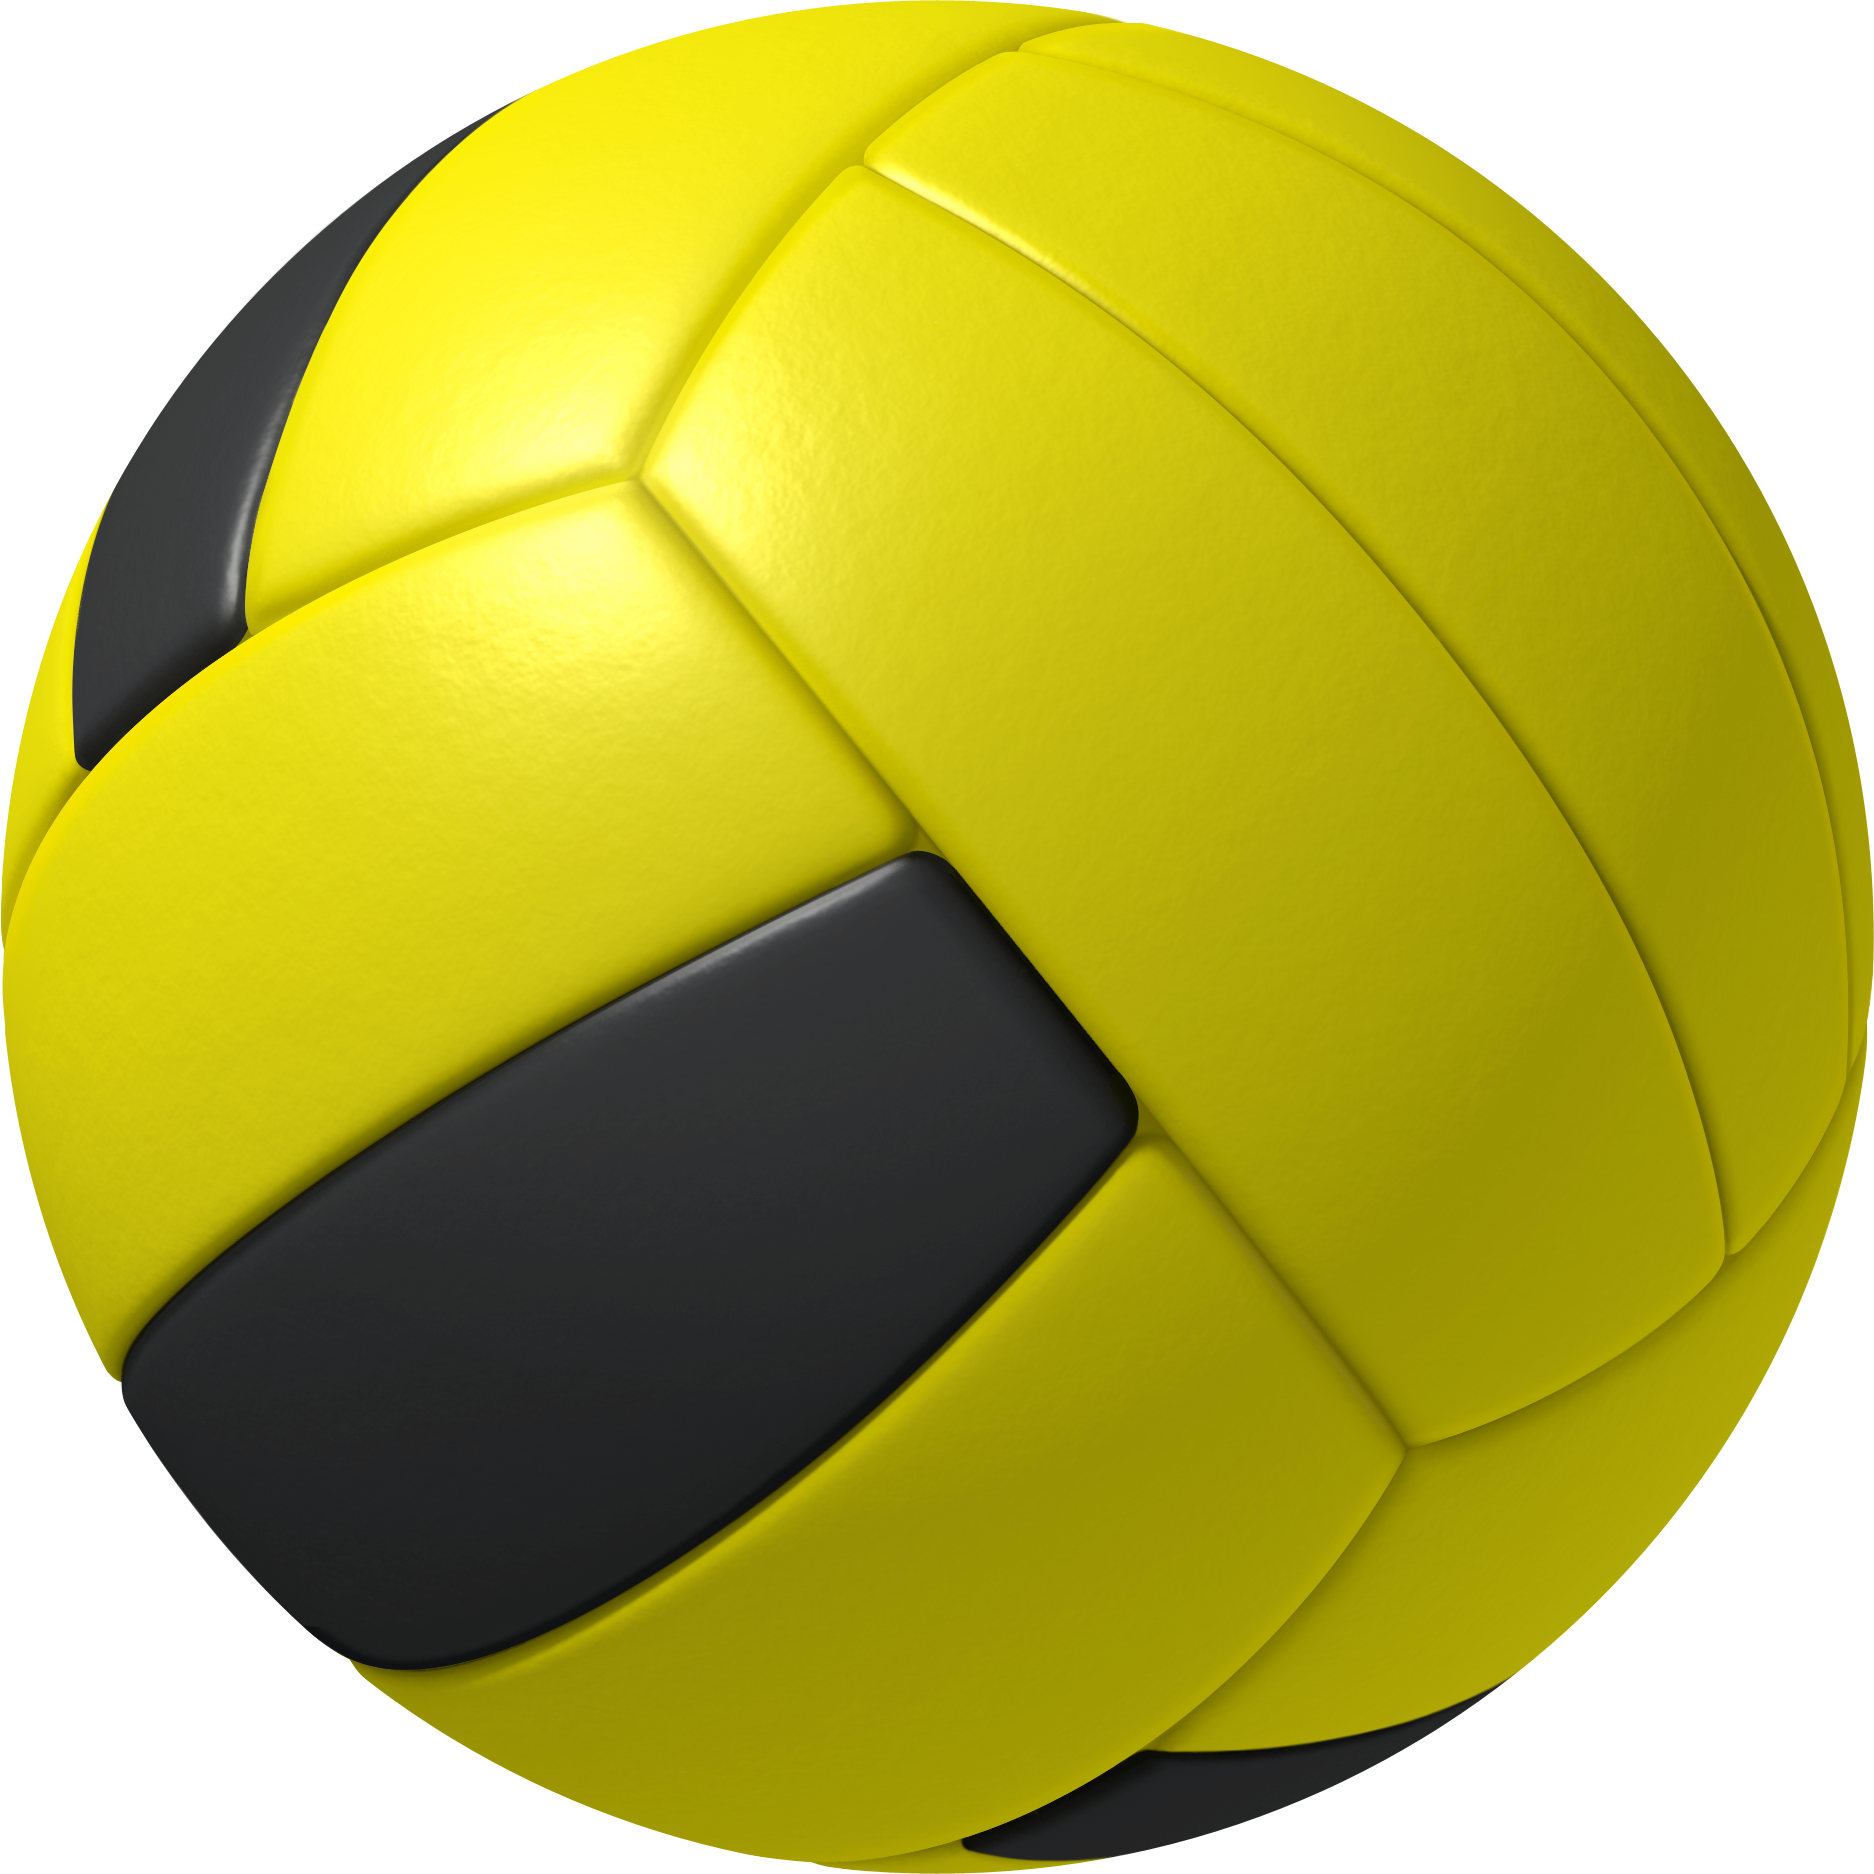 Volleyball Png Pic - Volleyball, Transparent background PNG HD thumbnail